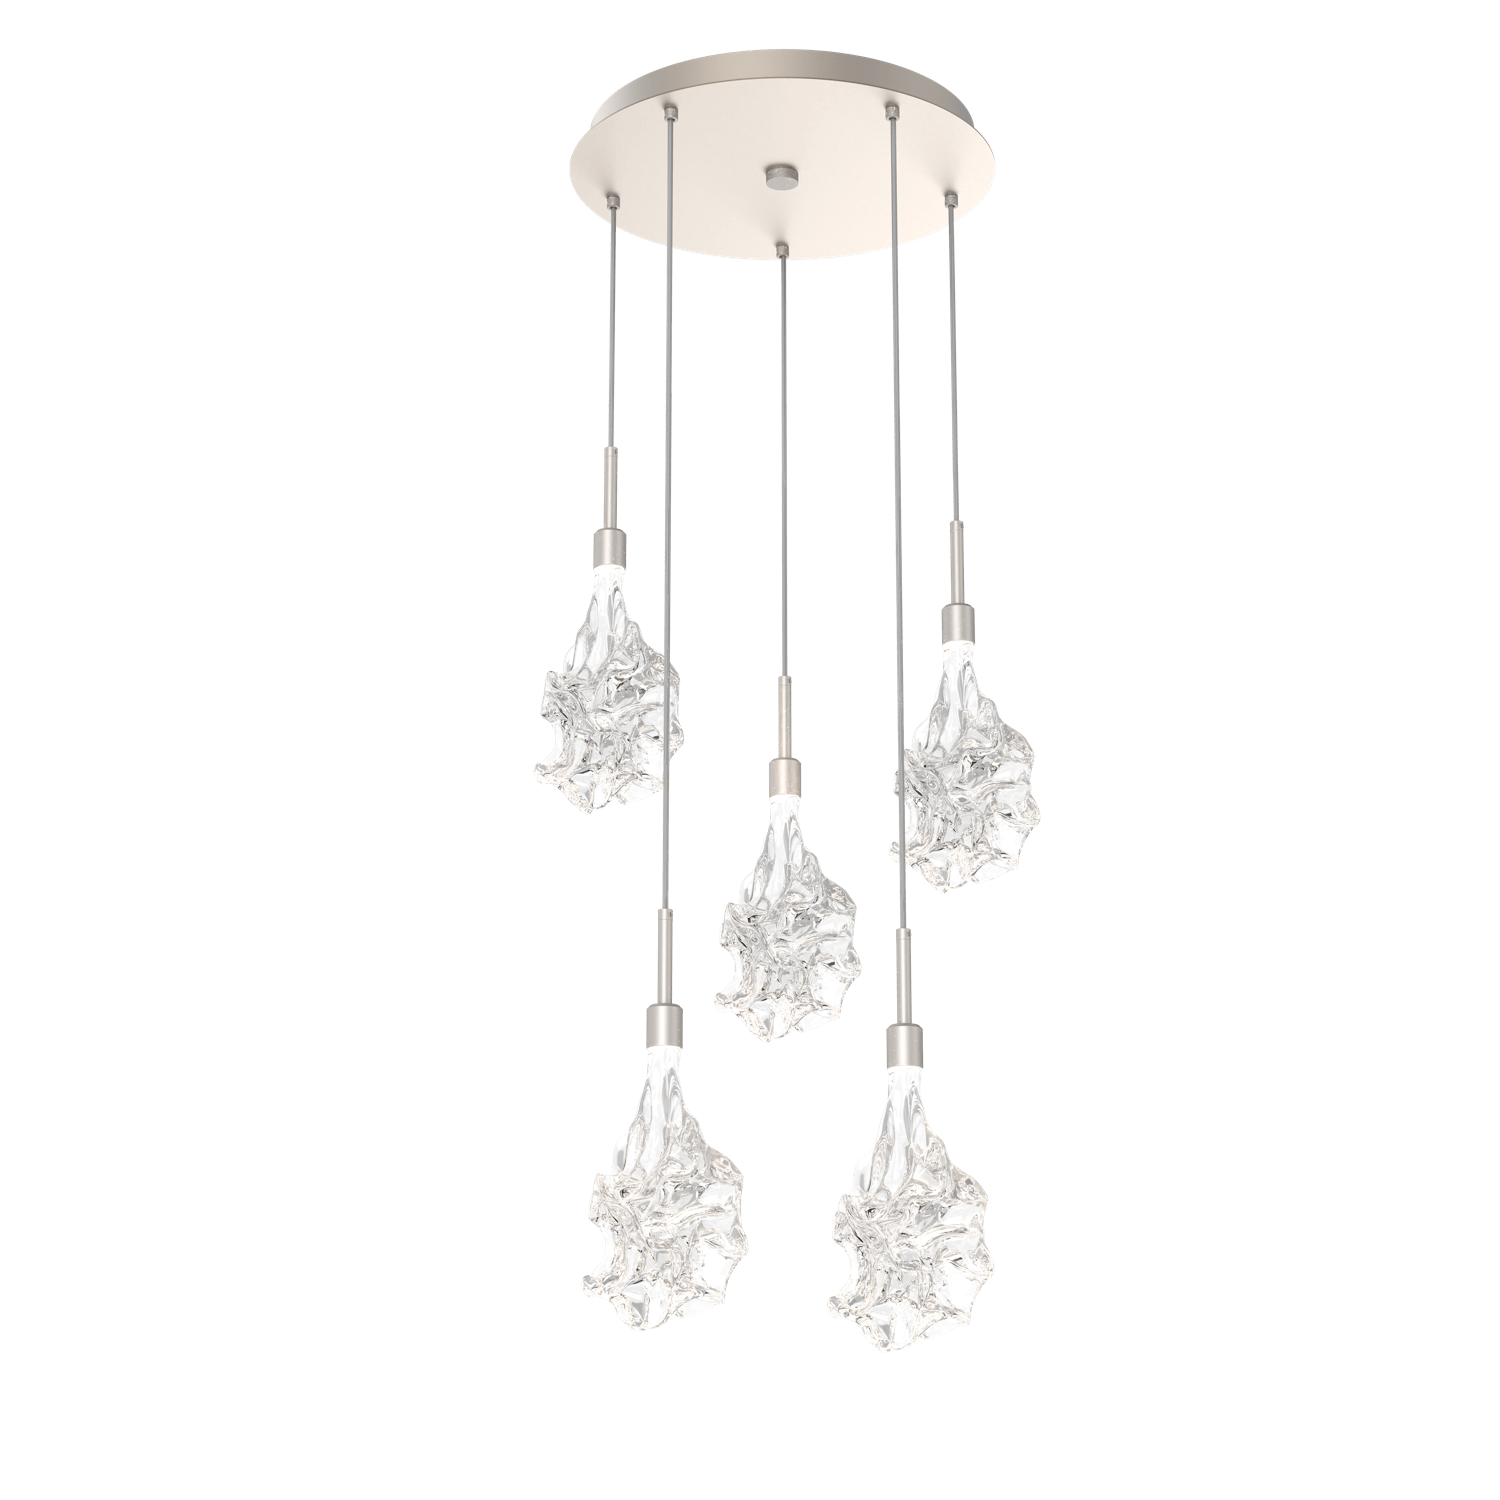 CHB0059-05-BS-Hammerton-Studio-Blossom-5-light-round-pendant-chandelier-with-metallic-beige-silver-finish-and-clear-handblown-crystal-glass-shades-and-LED-lamping